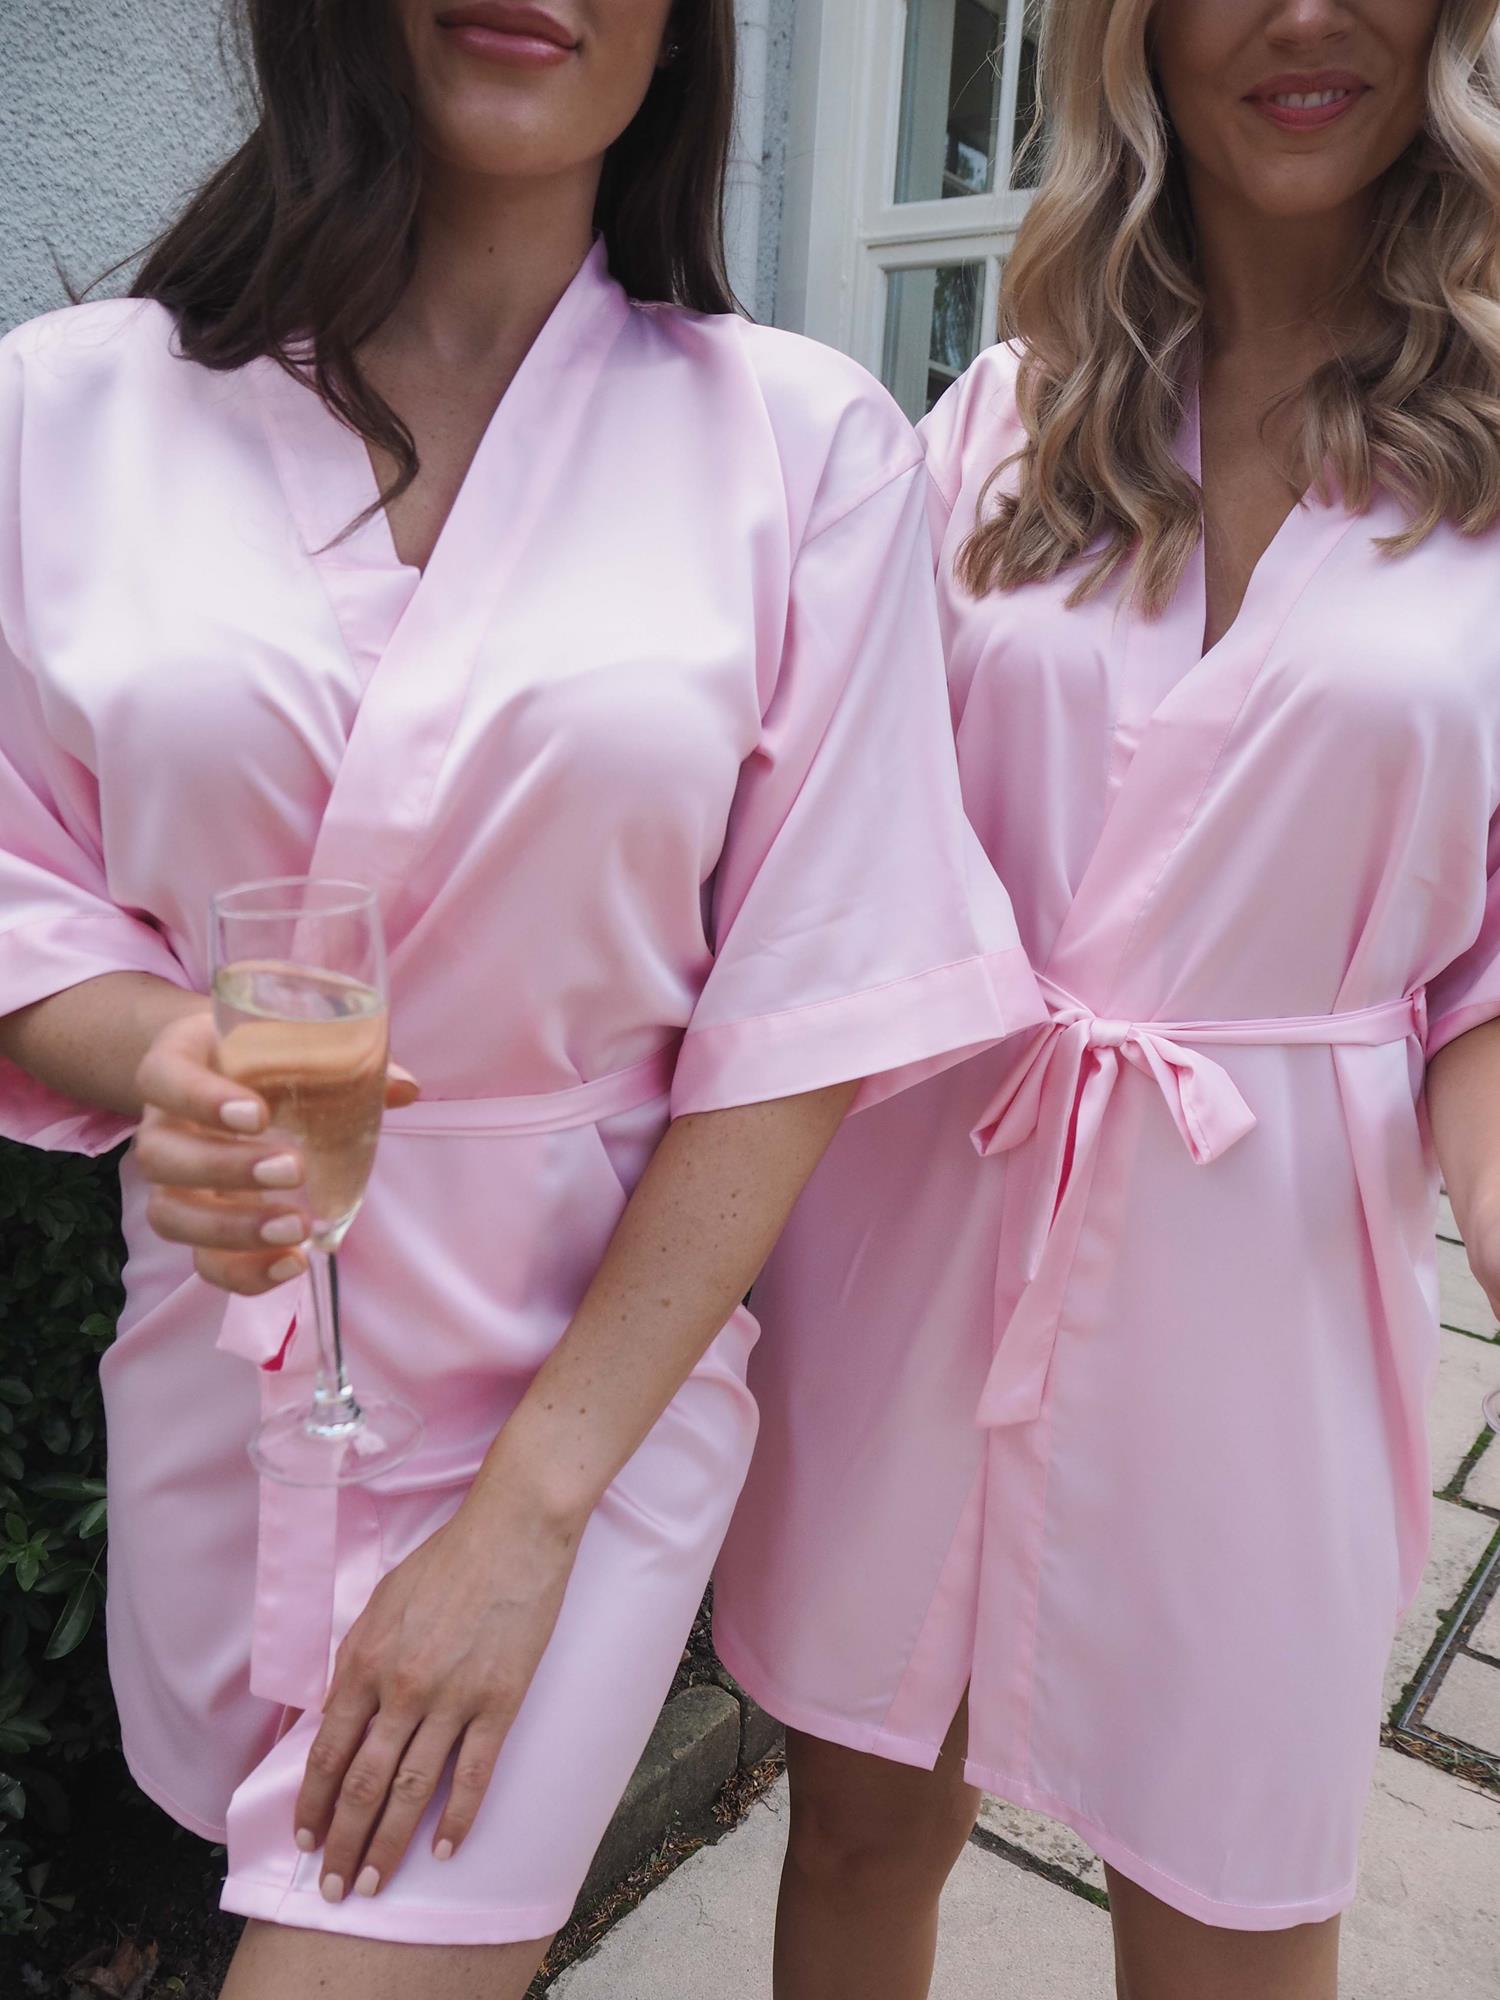 Baby pink personalised bridesmaid robes -Robes4you